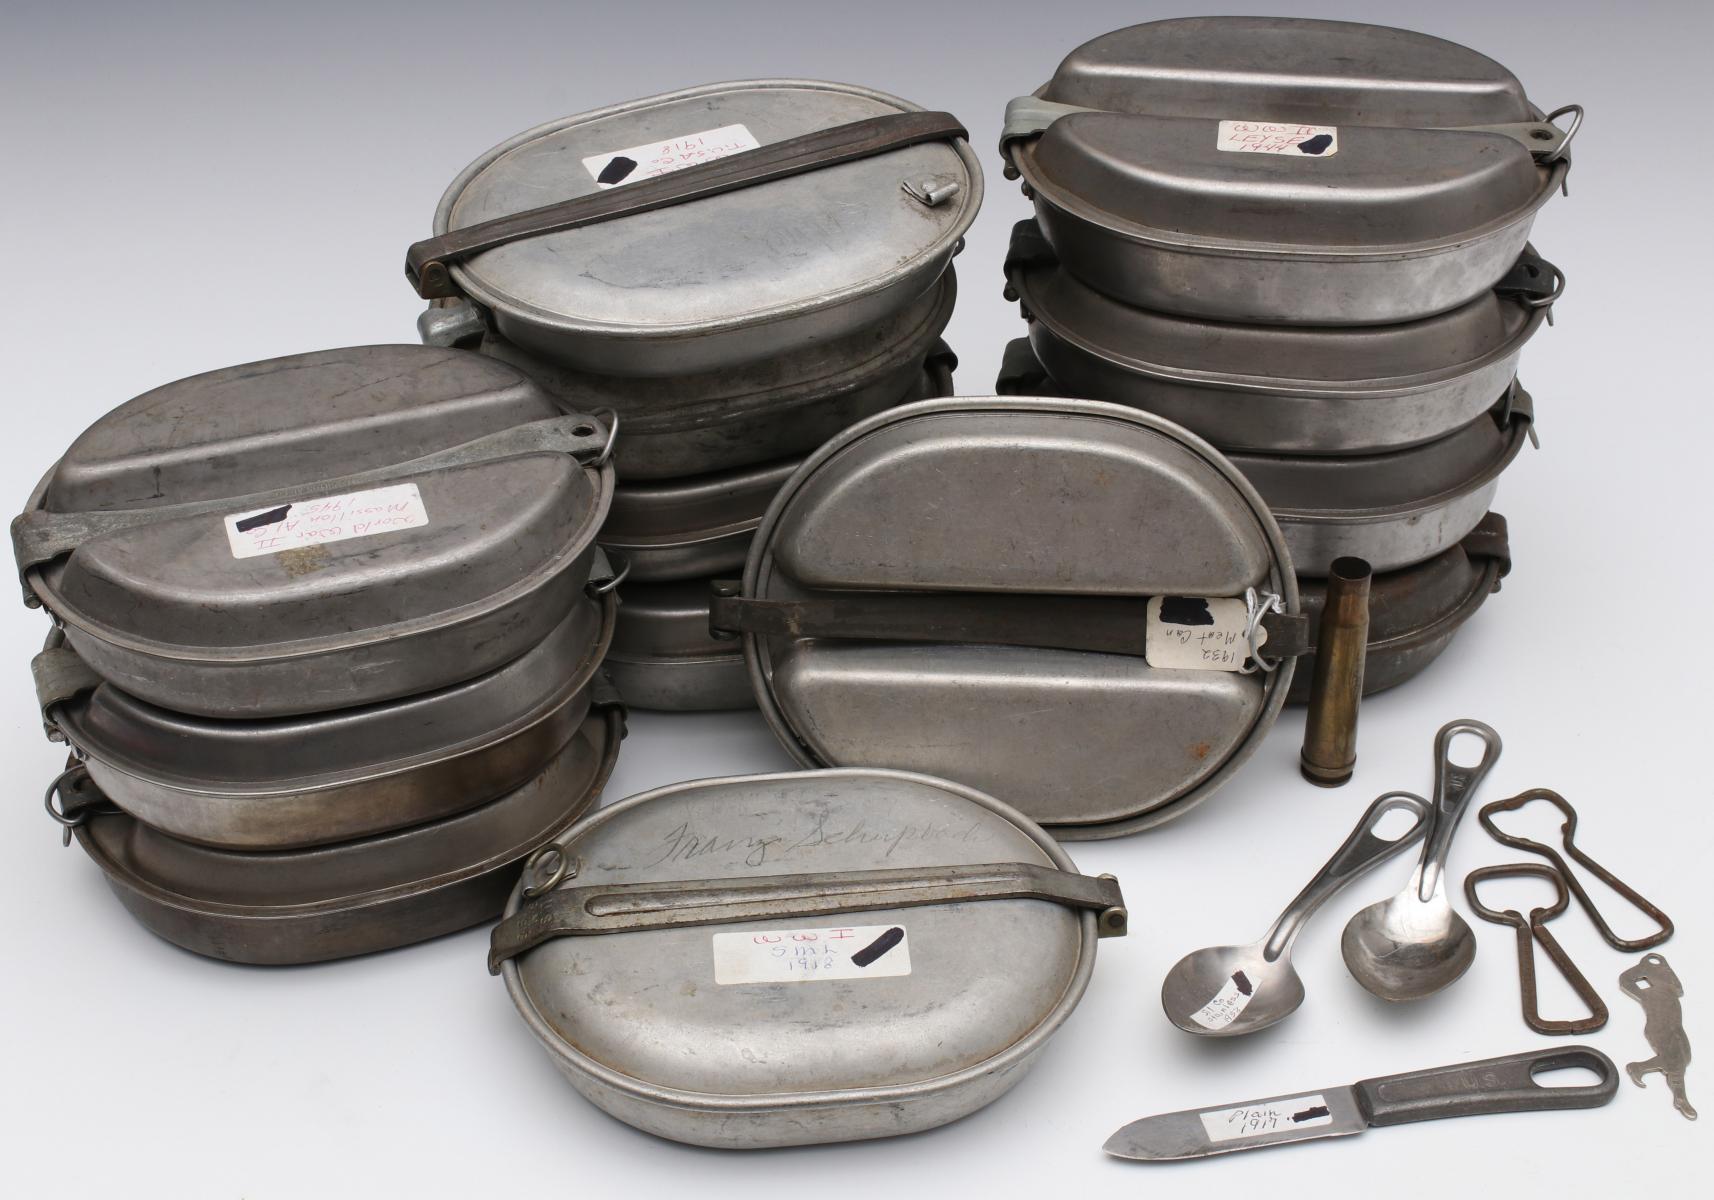 THIRTEEN WWI AND WWII MESS KITS